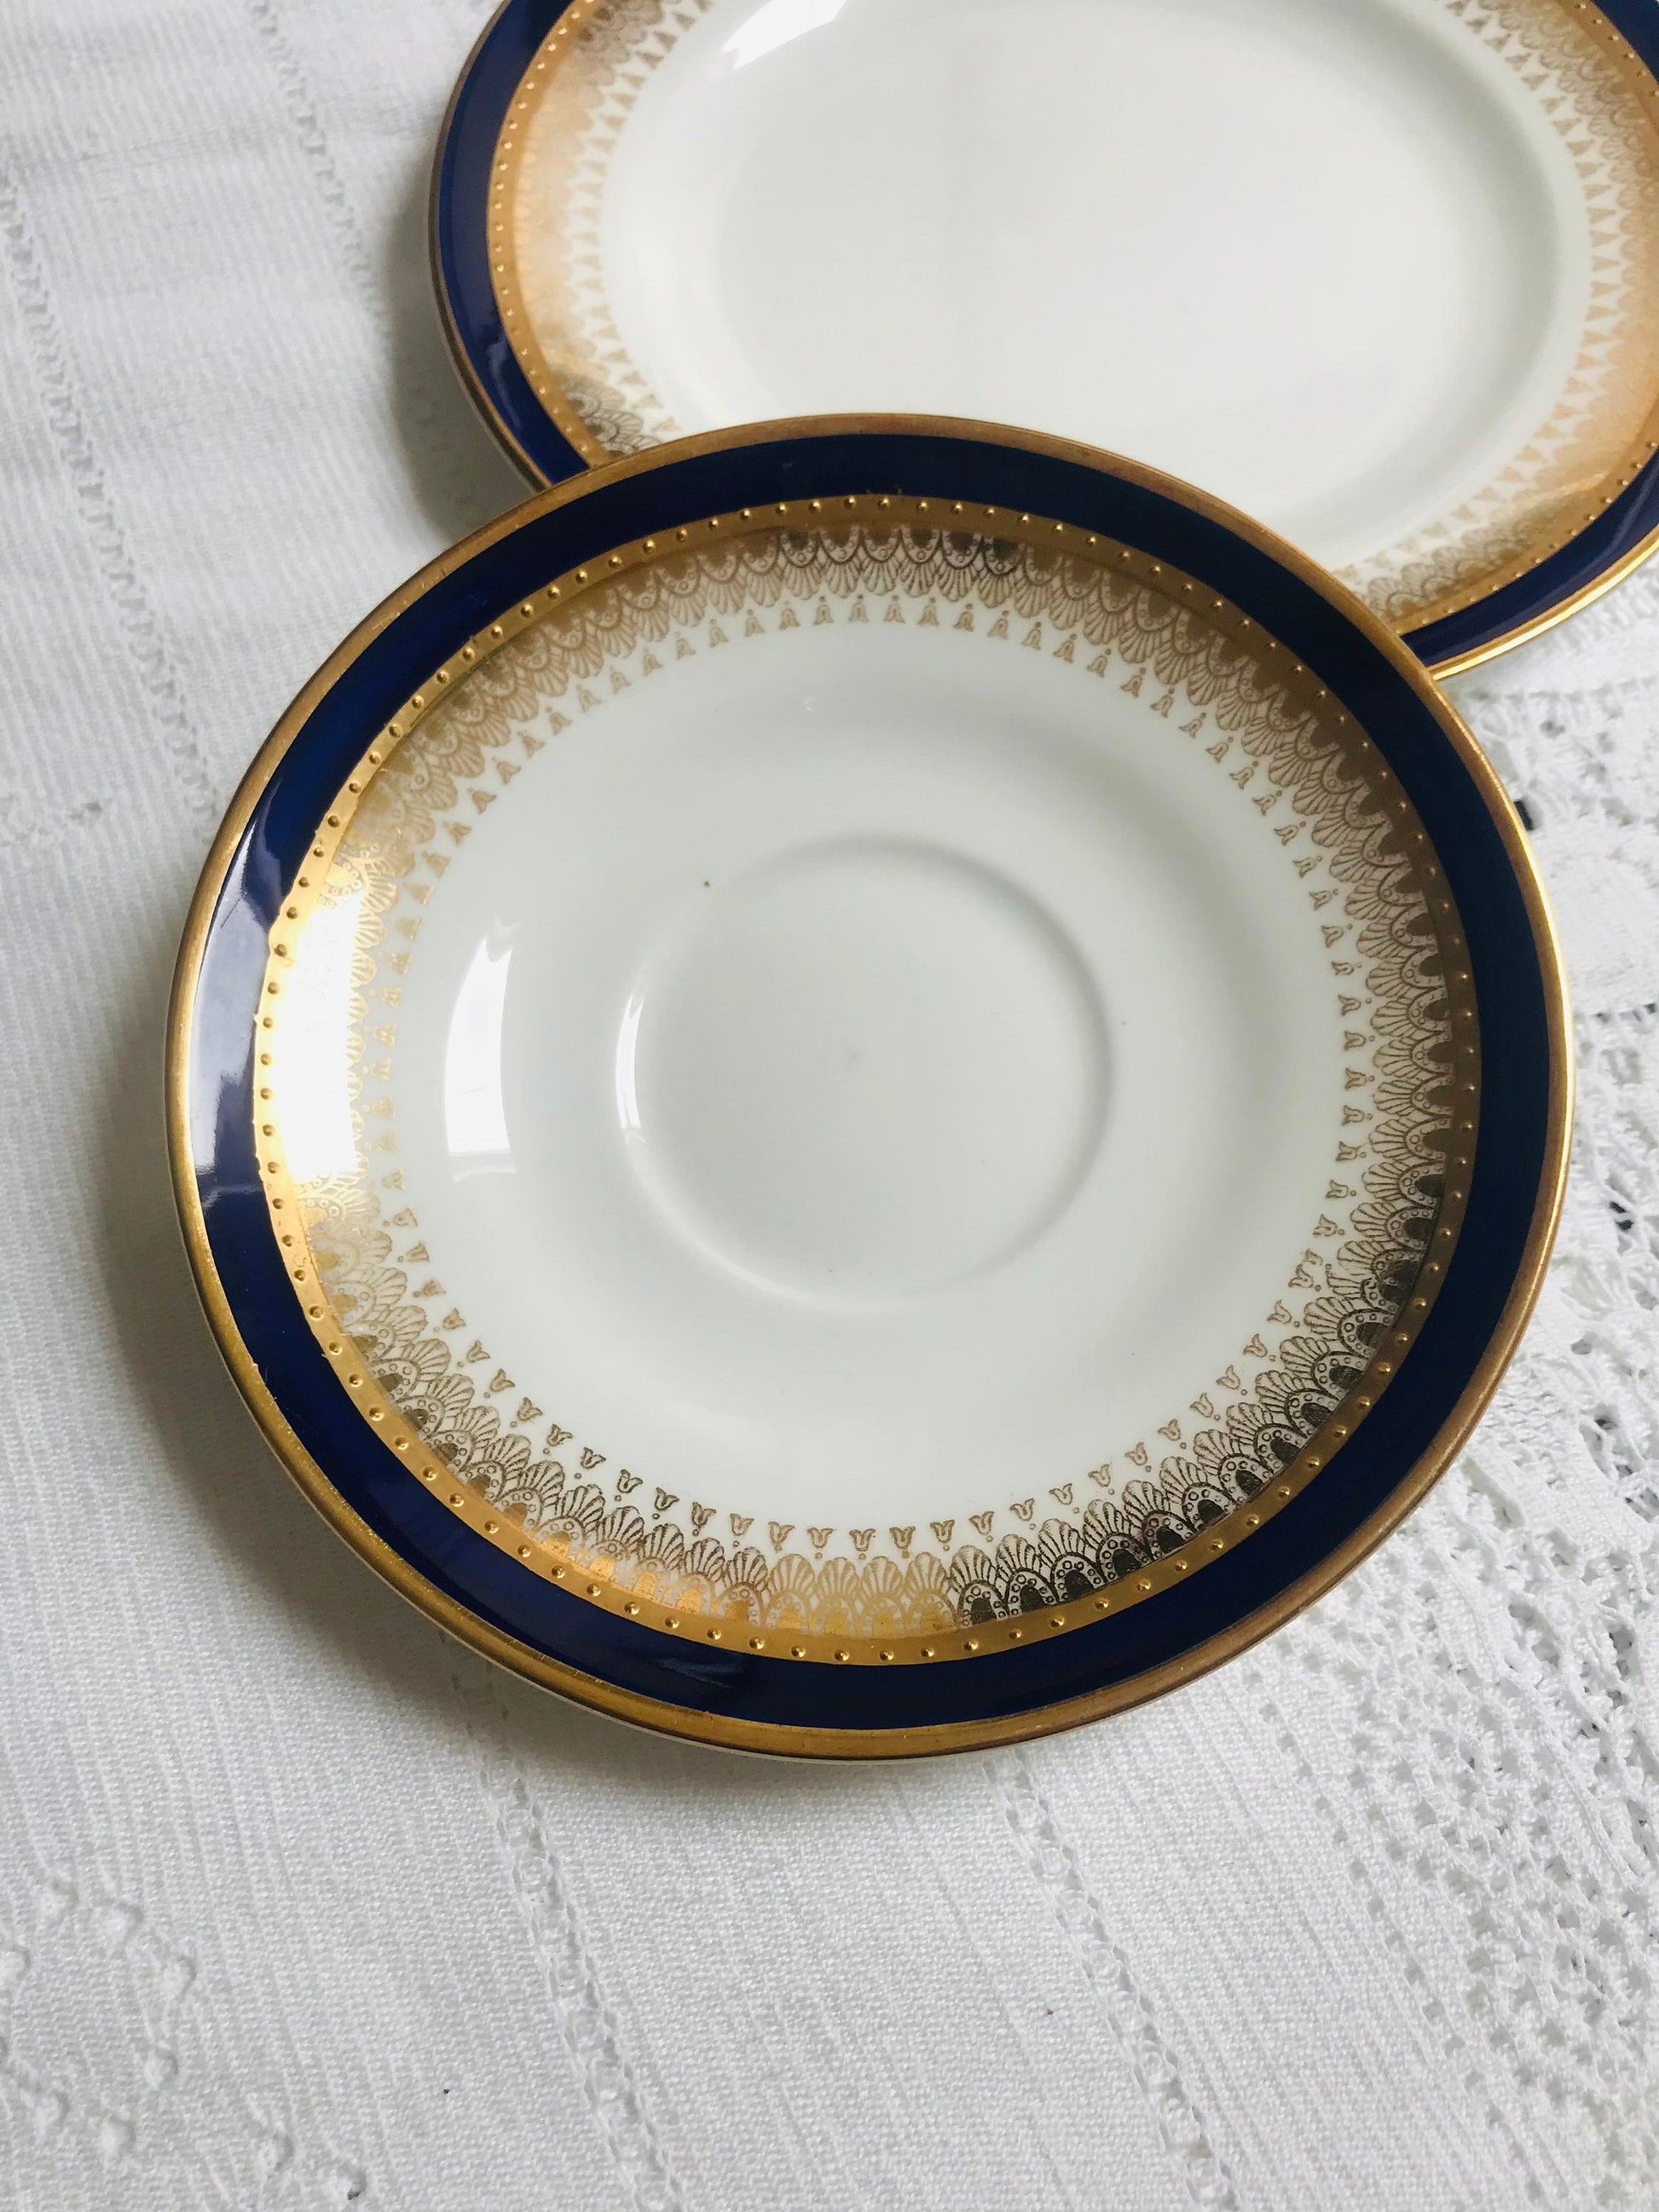 Elegant Crescent China Blue White Gold Teacup Saucer Tea for 6 English afternoon tea china